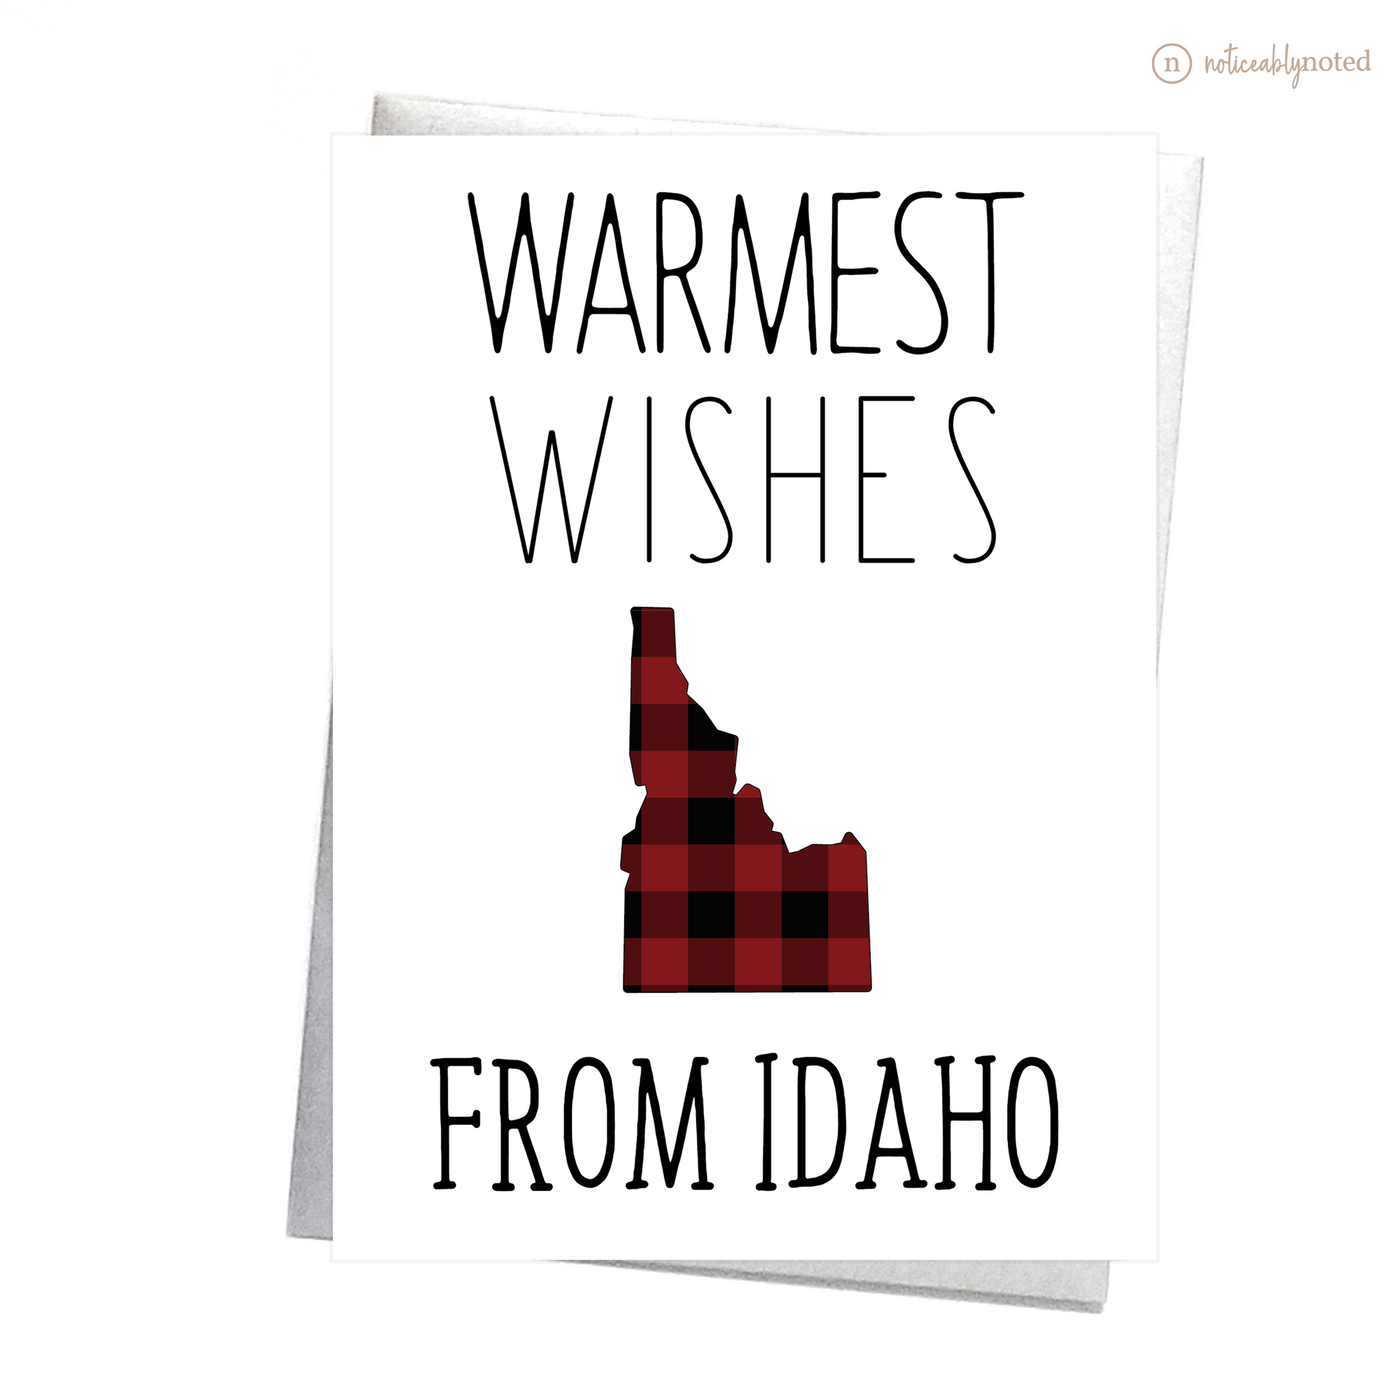 ID Holiday Greeting Cards | Noticeably Noted